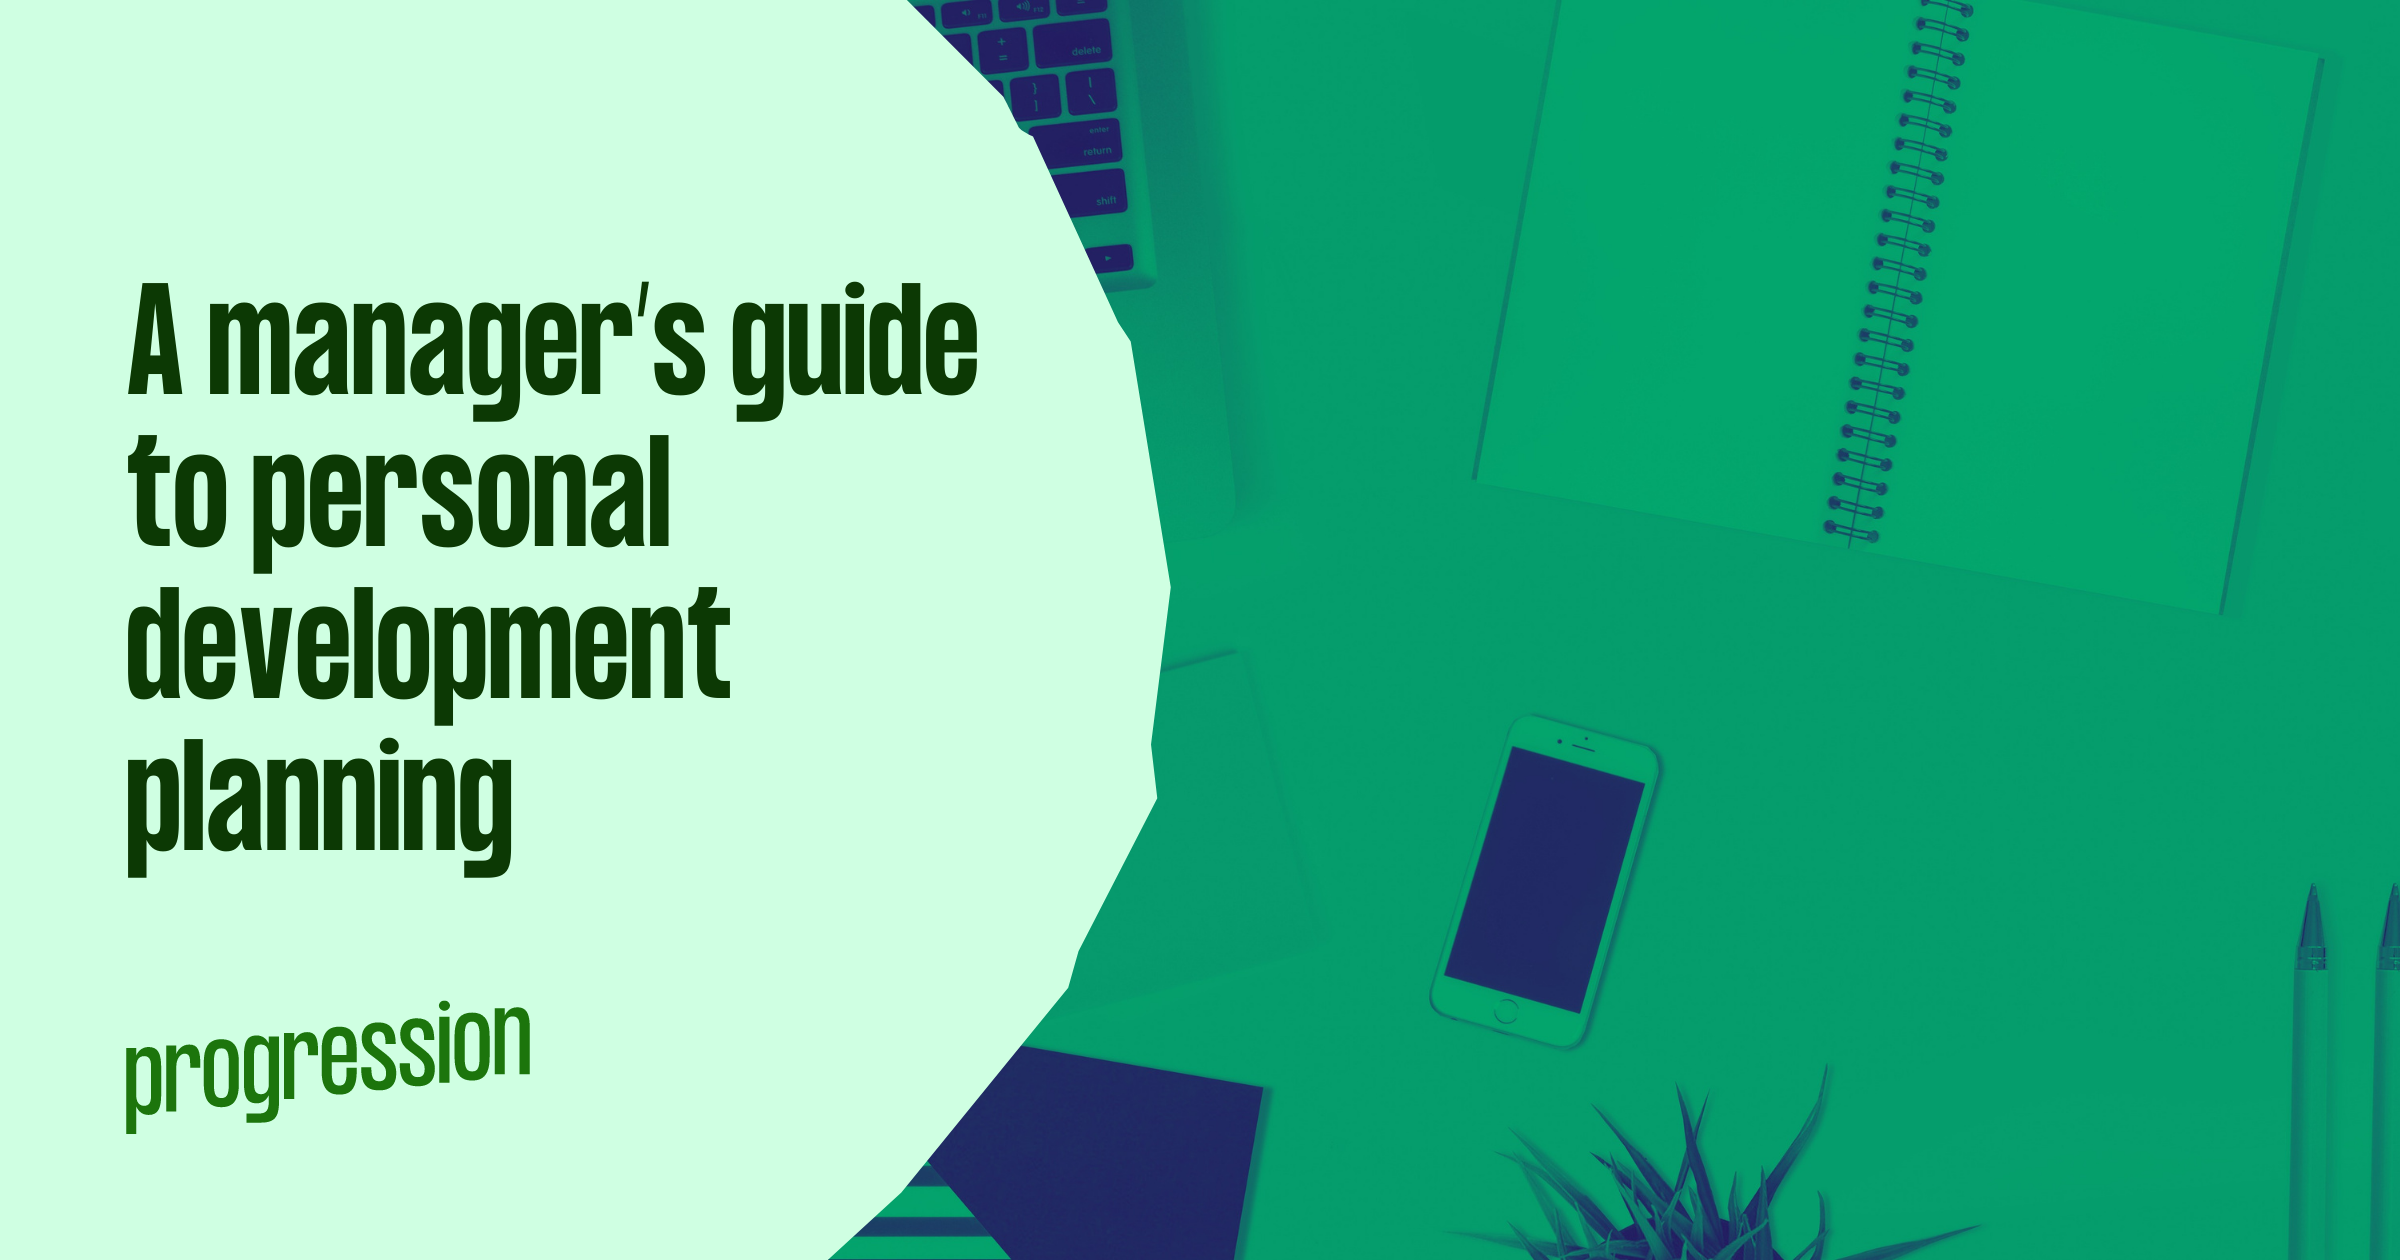 A manager’s guide to personal development planning